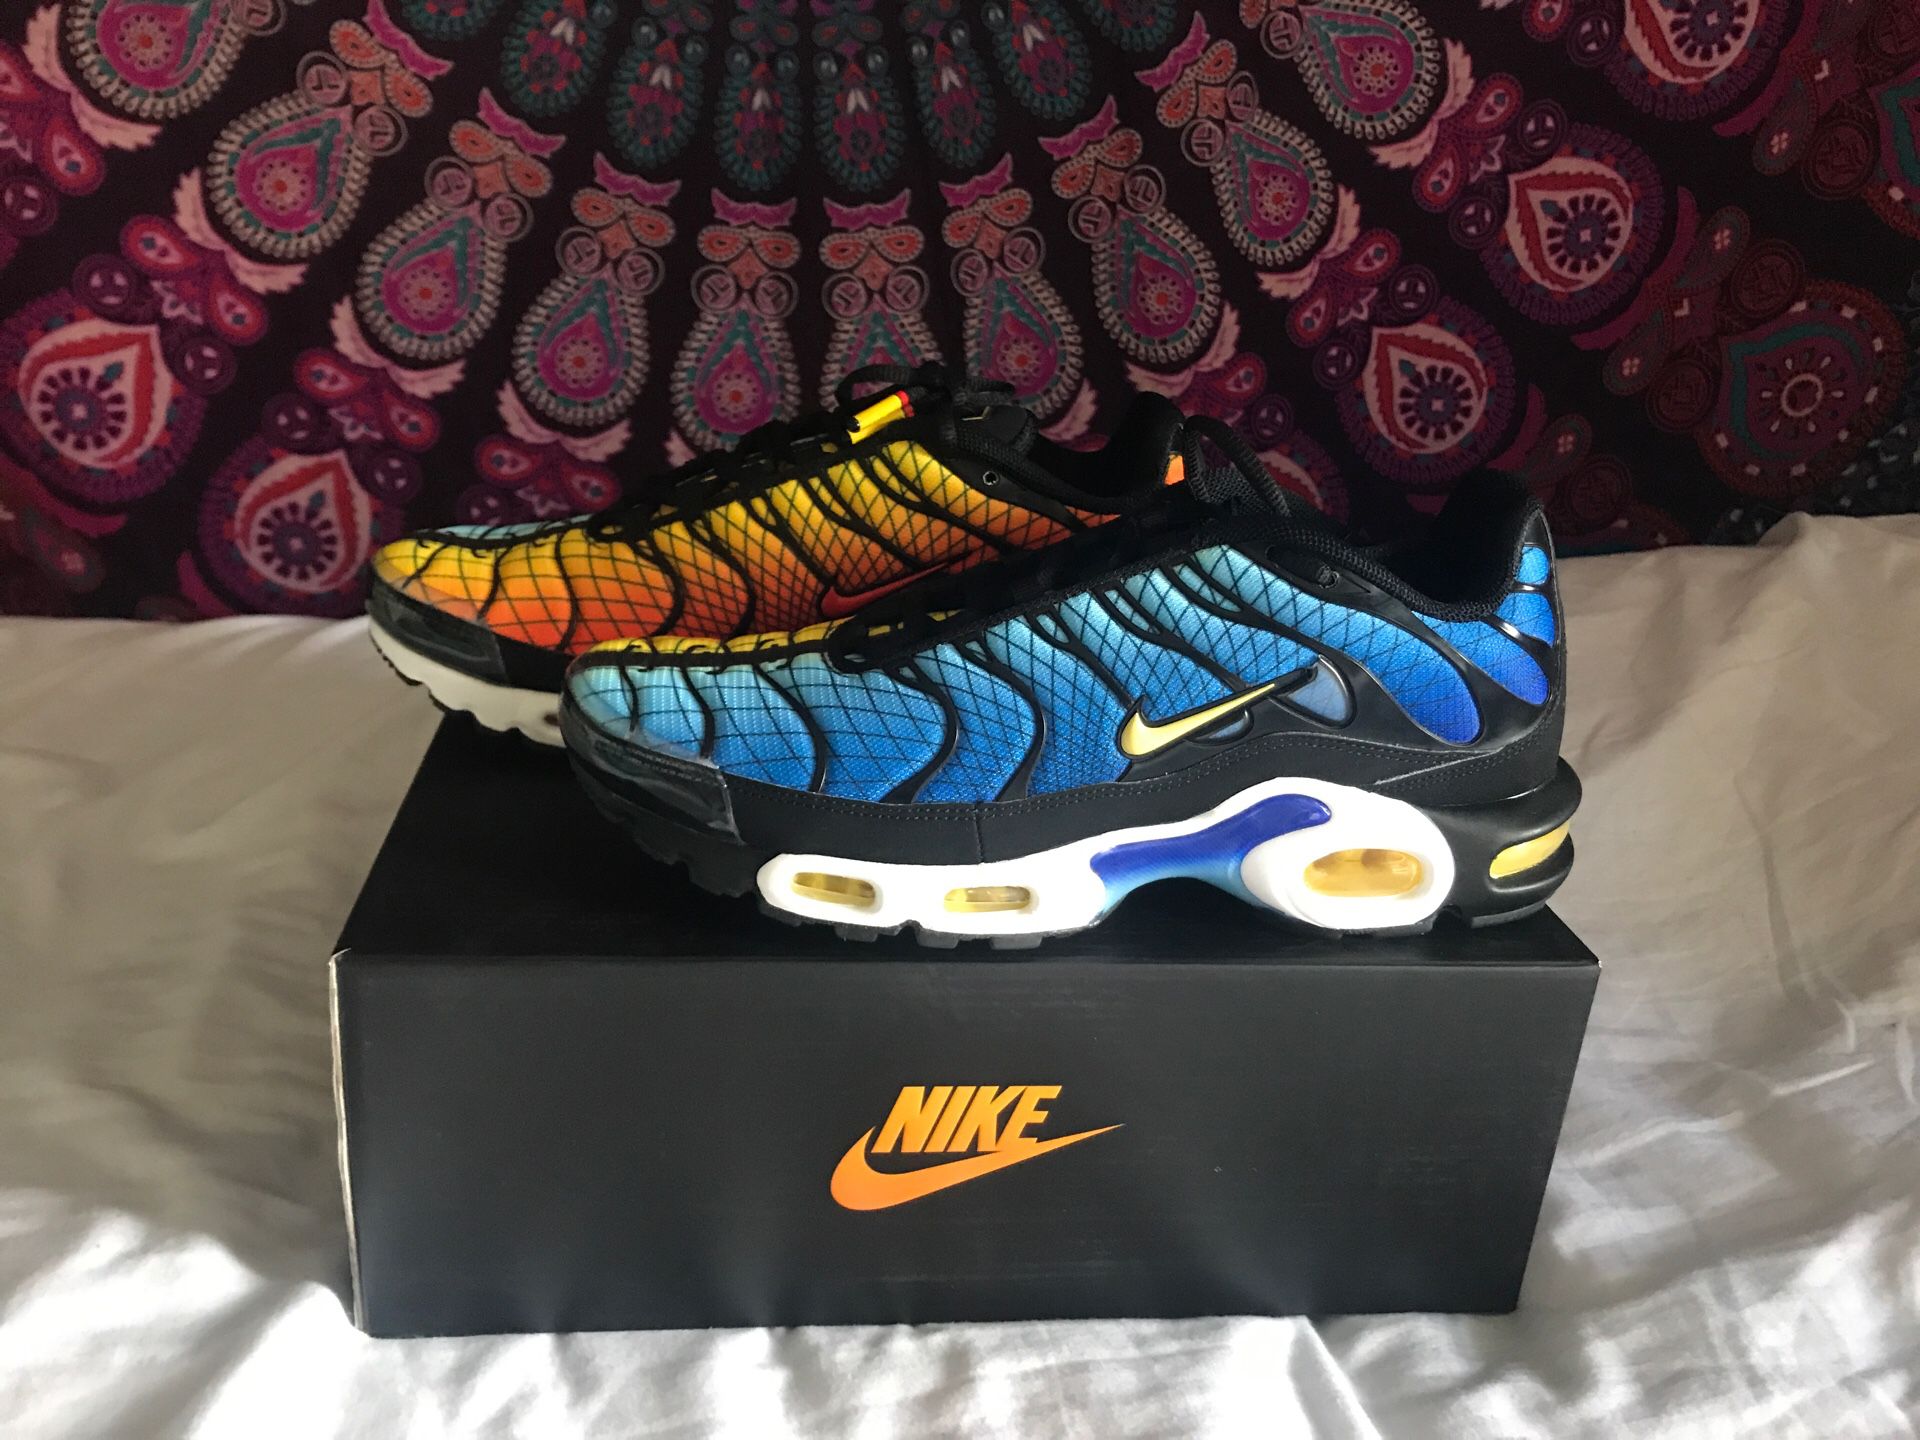 Nike air max plus Tn se orange and blue color way size 9.5 new never used before